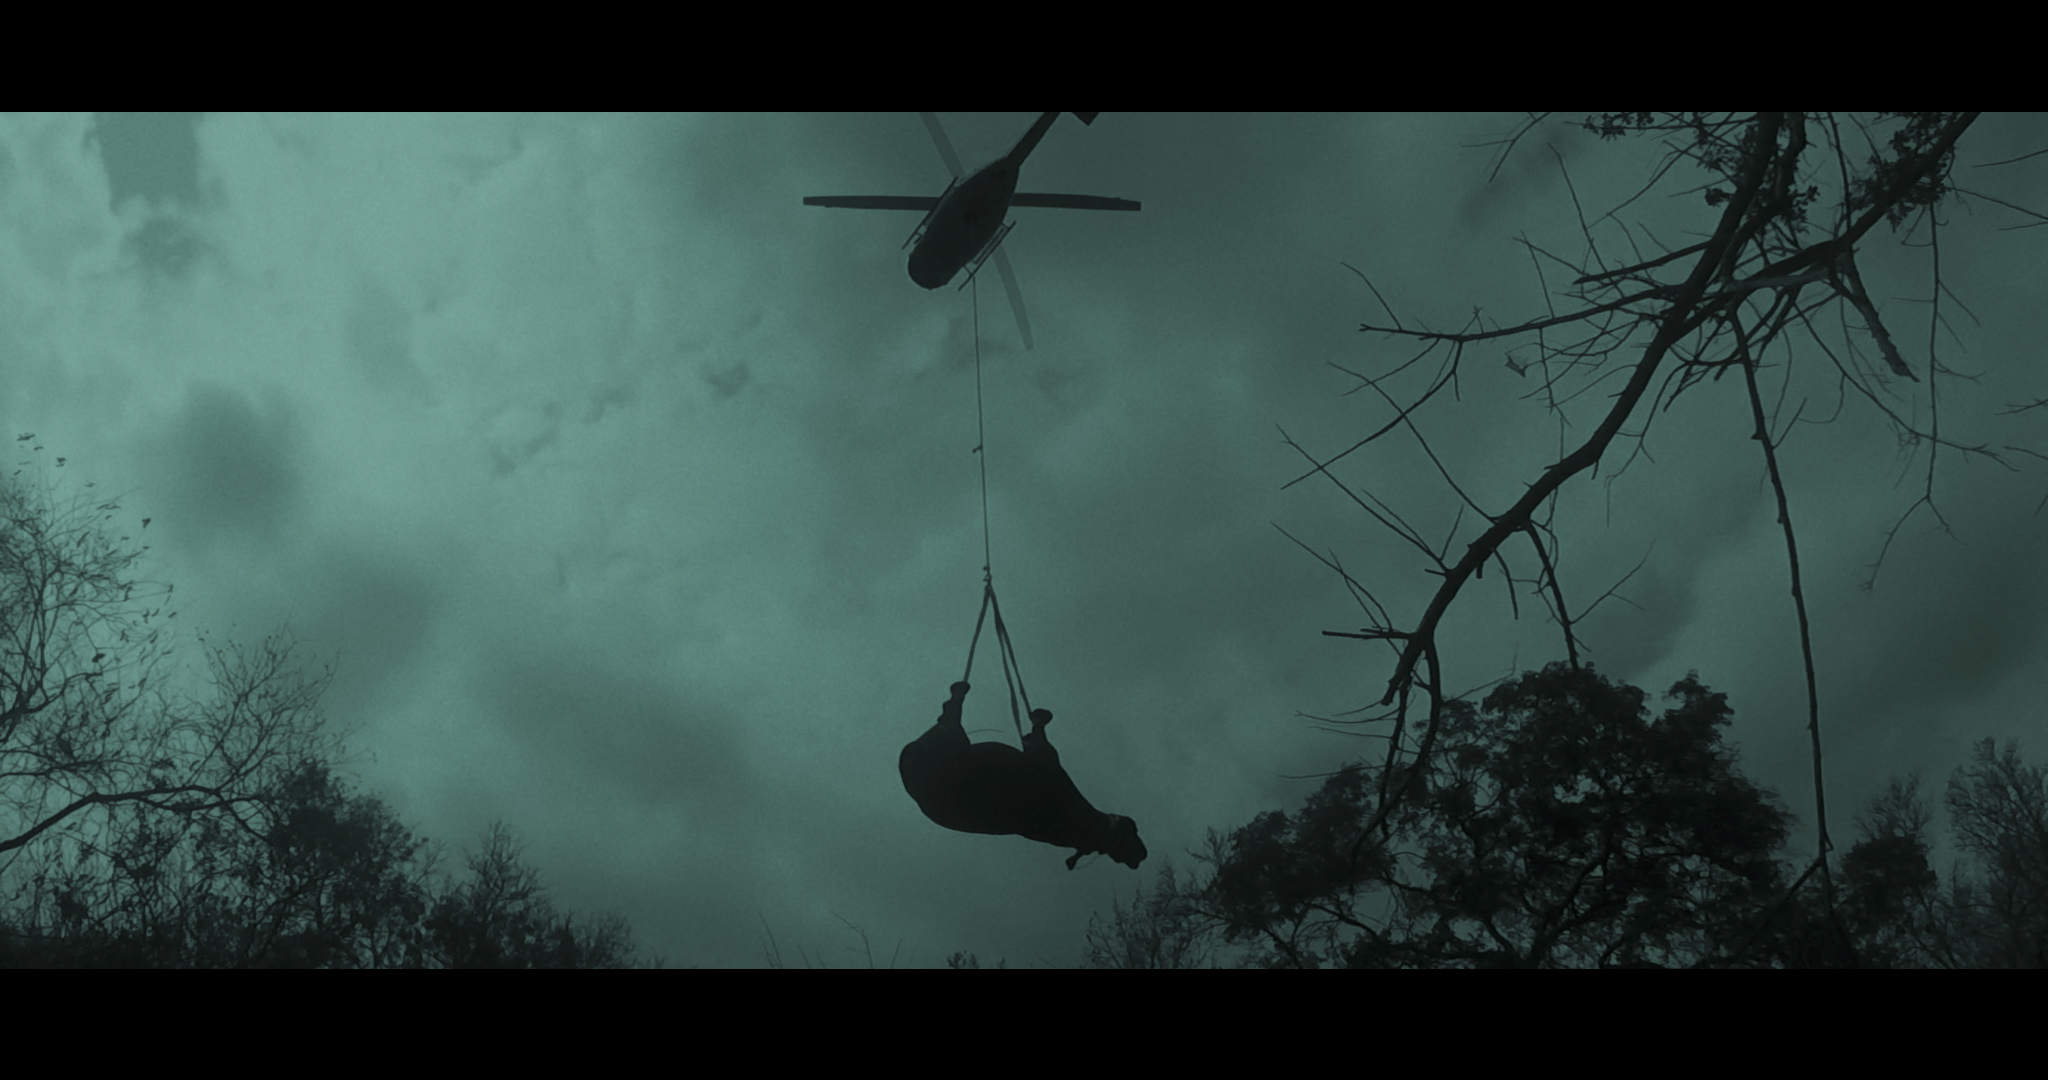 Still from Surrender Your Horns. Image Description: A silhouette of what looks like a dead cow or bull is being carried by a helicopter. 